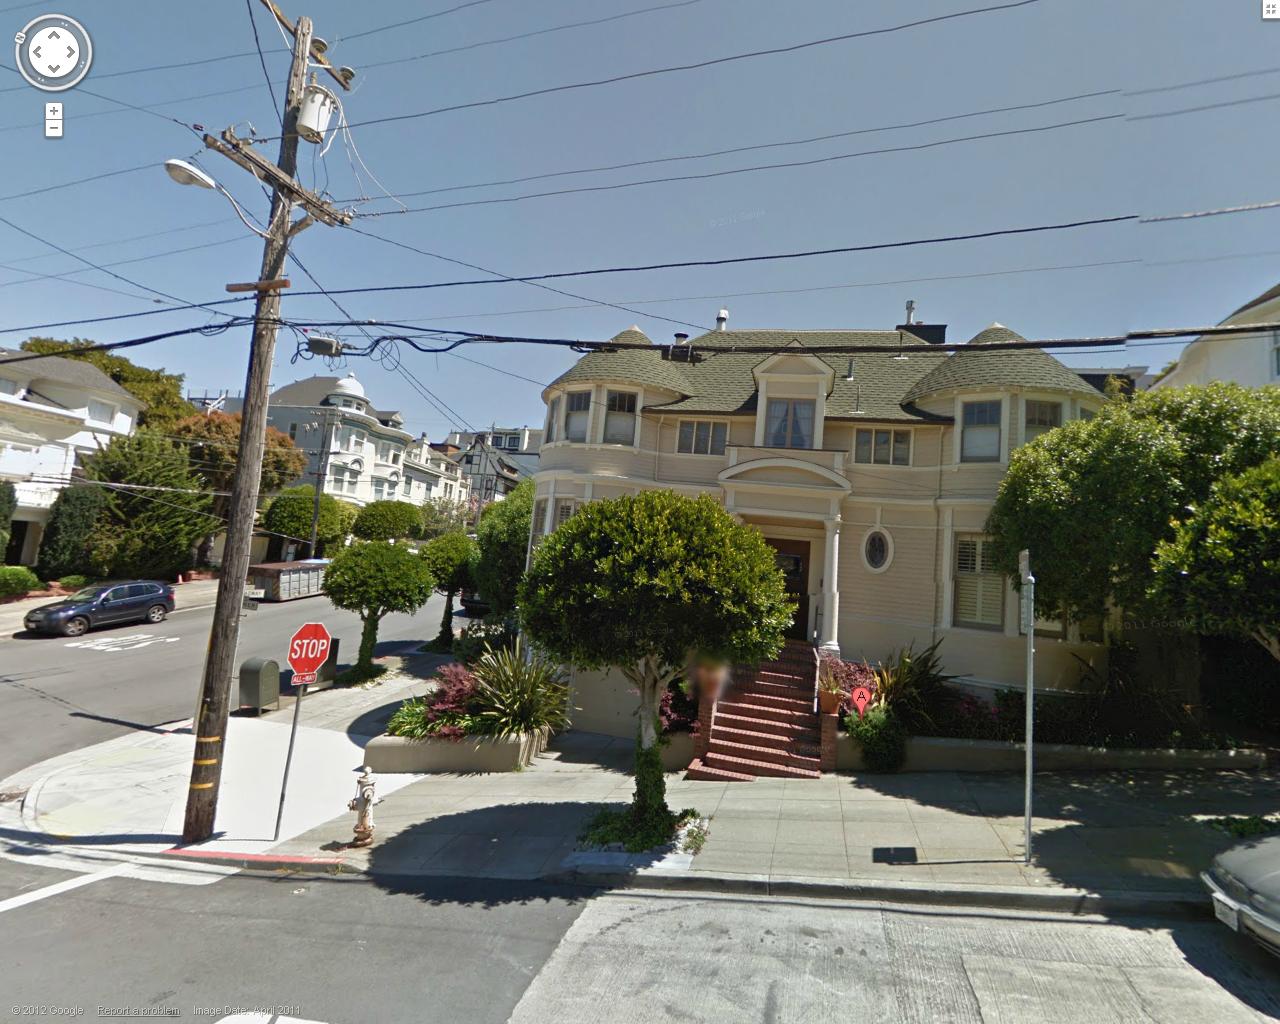 The house from Mrs. Doubtfire